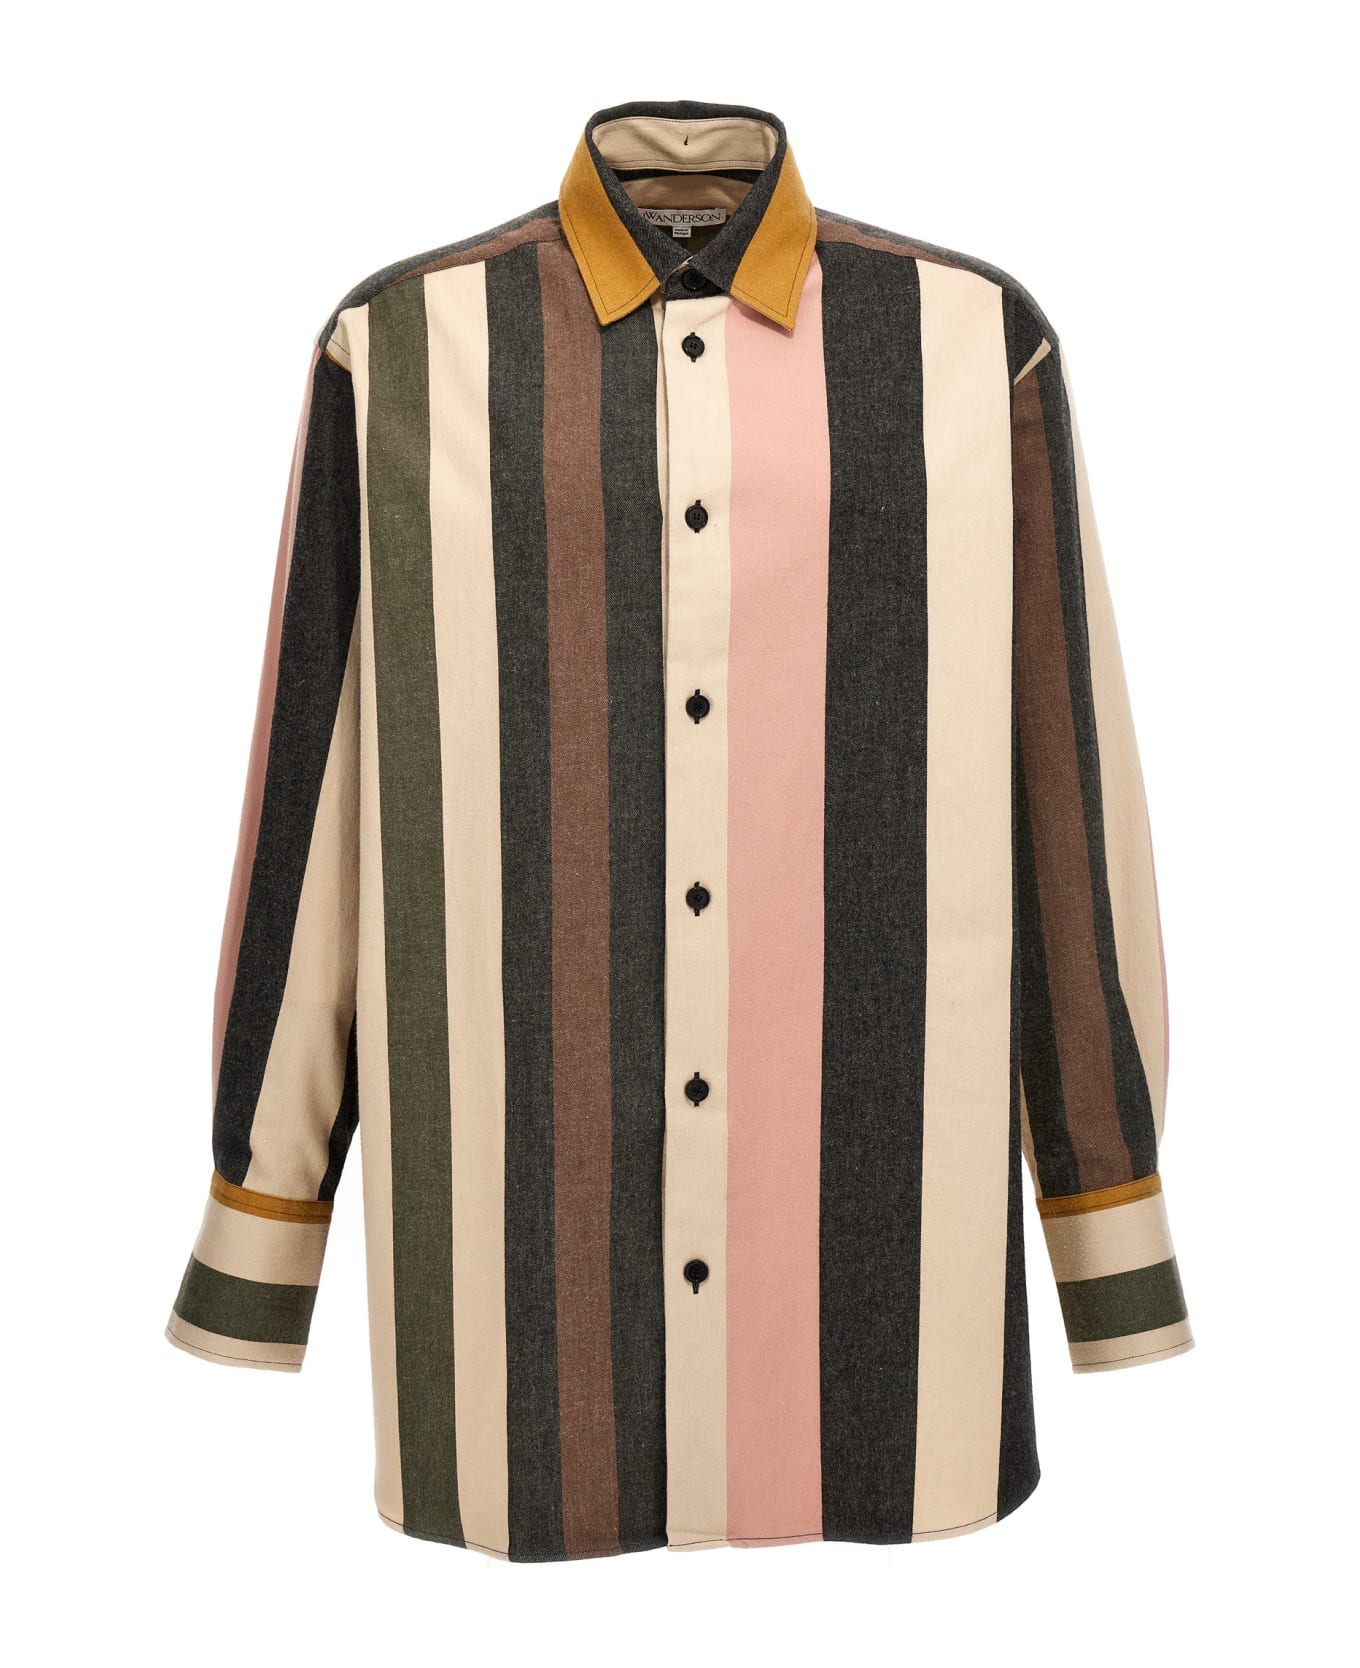 J.W. Anderson Logo Embroidered Striped Shirt - Flax Multi